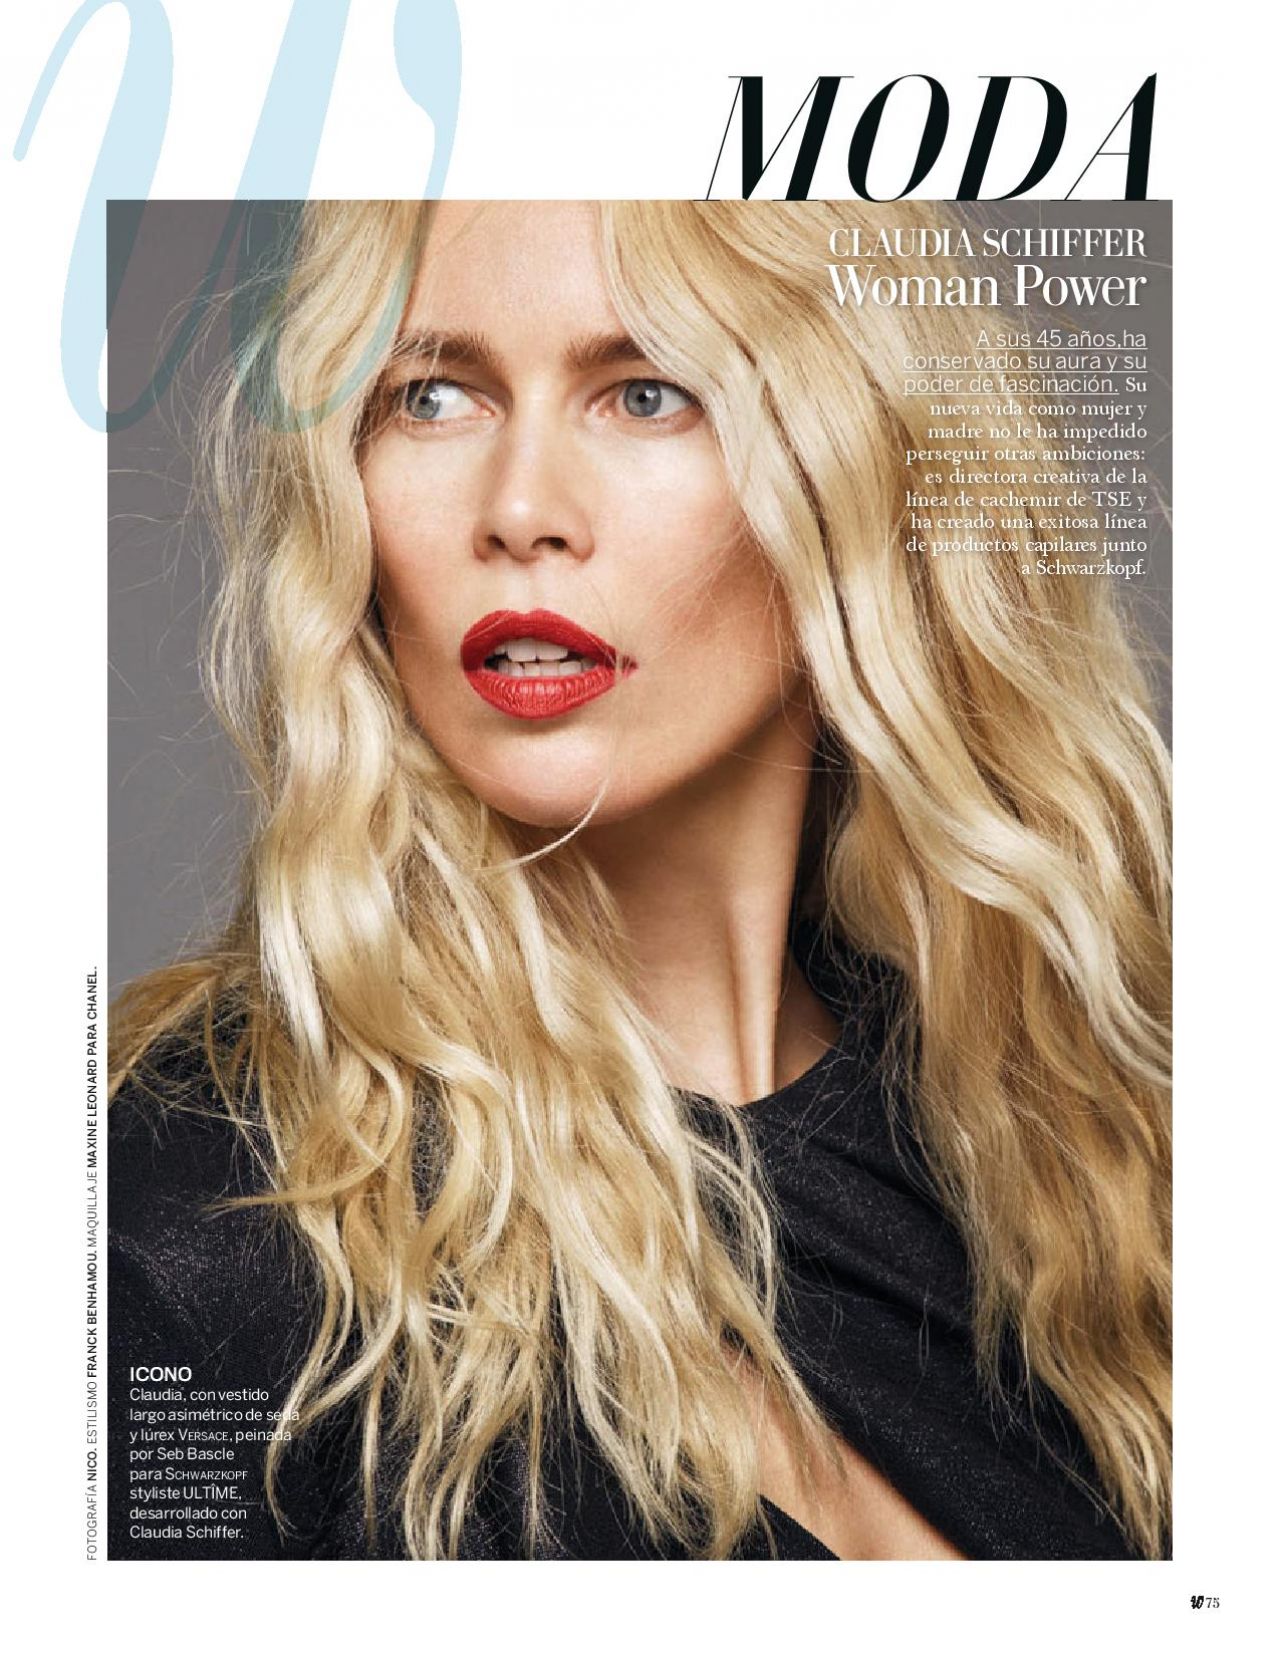 claudia-schiffer-wonder-claudia-woman-spain-july-2016-issue-13